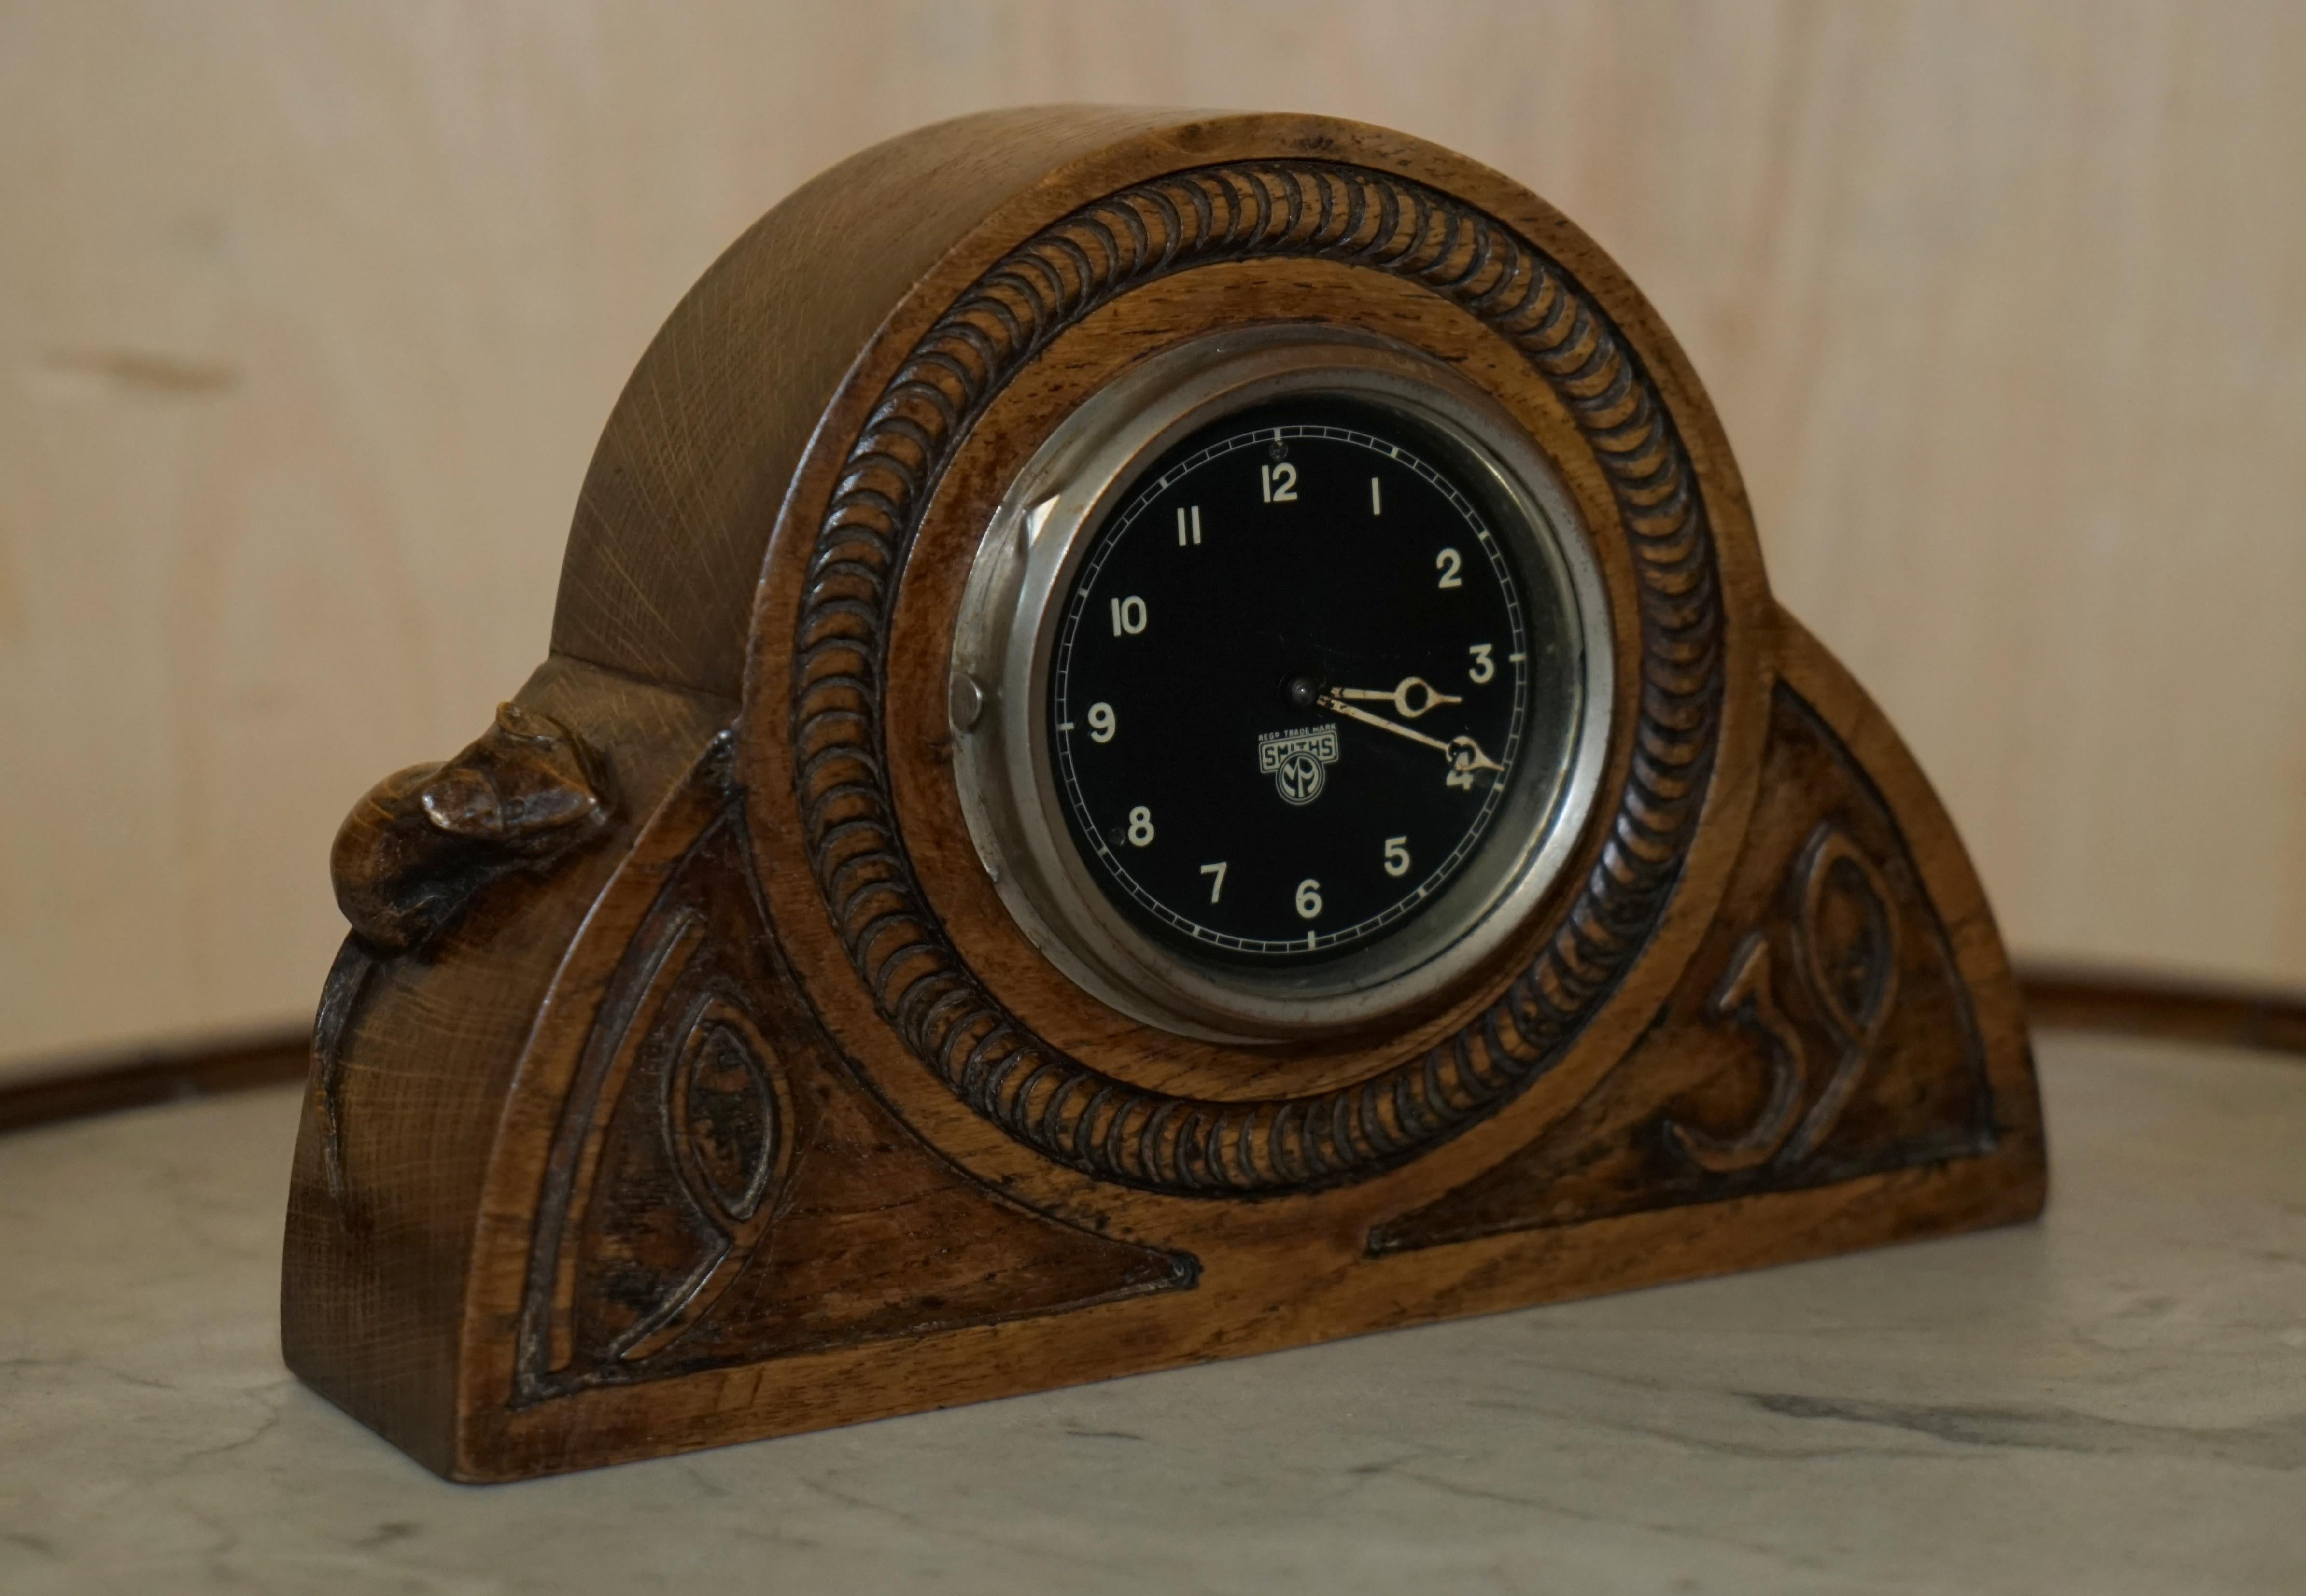 We are delighted to offer for sale this absolutely sublime highly collectable Robert Mouseman Thompson 1939 carved and dated mantle clock with the original Smiths movement 

I bought this piece for myself, I don't want to sell it, it is one of two